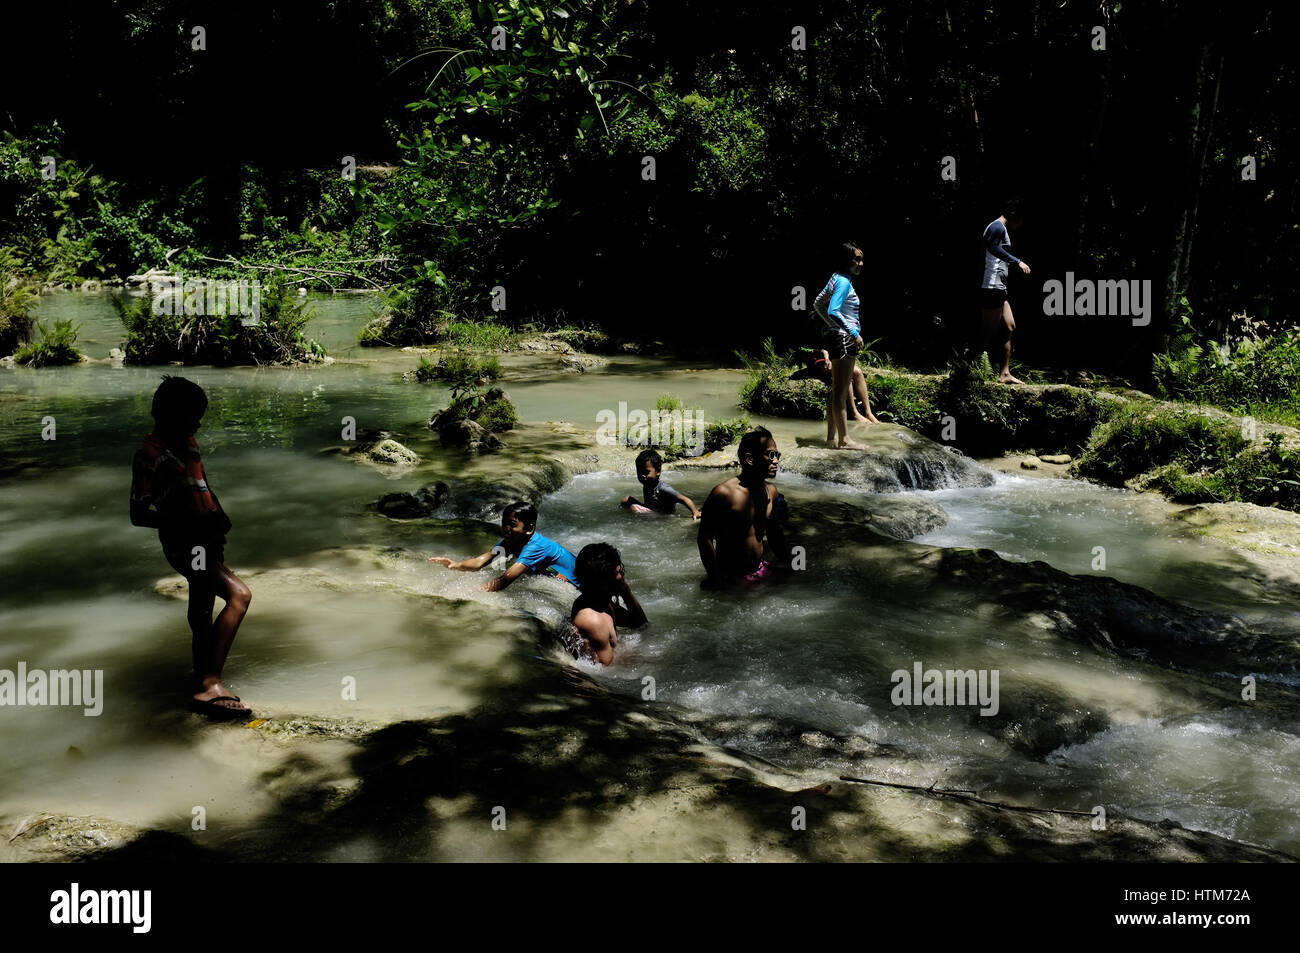 People are enjoying the Cambugahay waterfall area at Siquijor, an island province of the Philippines. Stock Photo